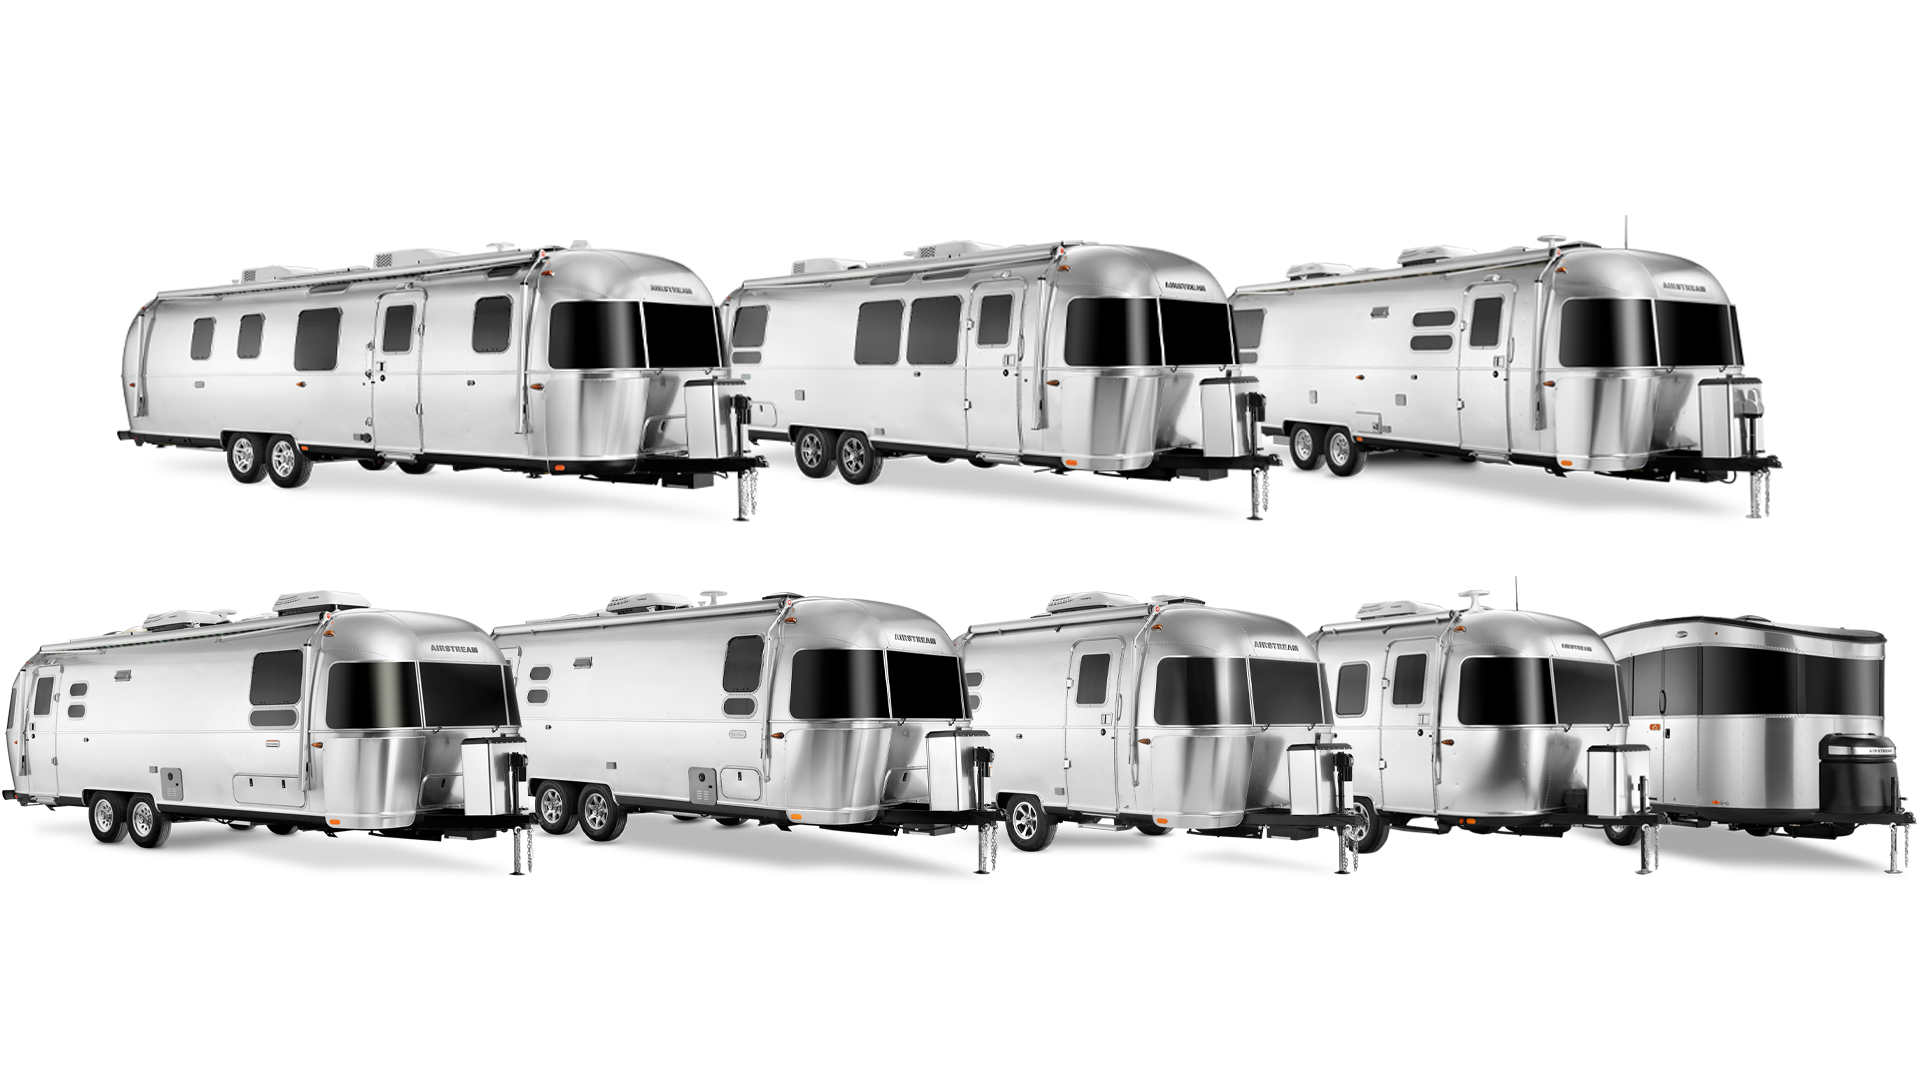 All 8 models of Airstream's Travel Trailers